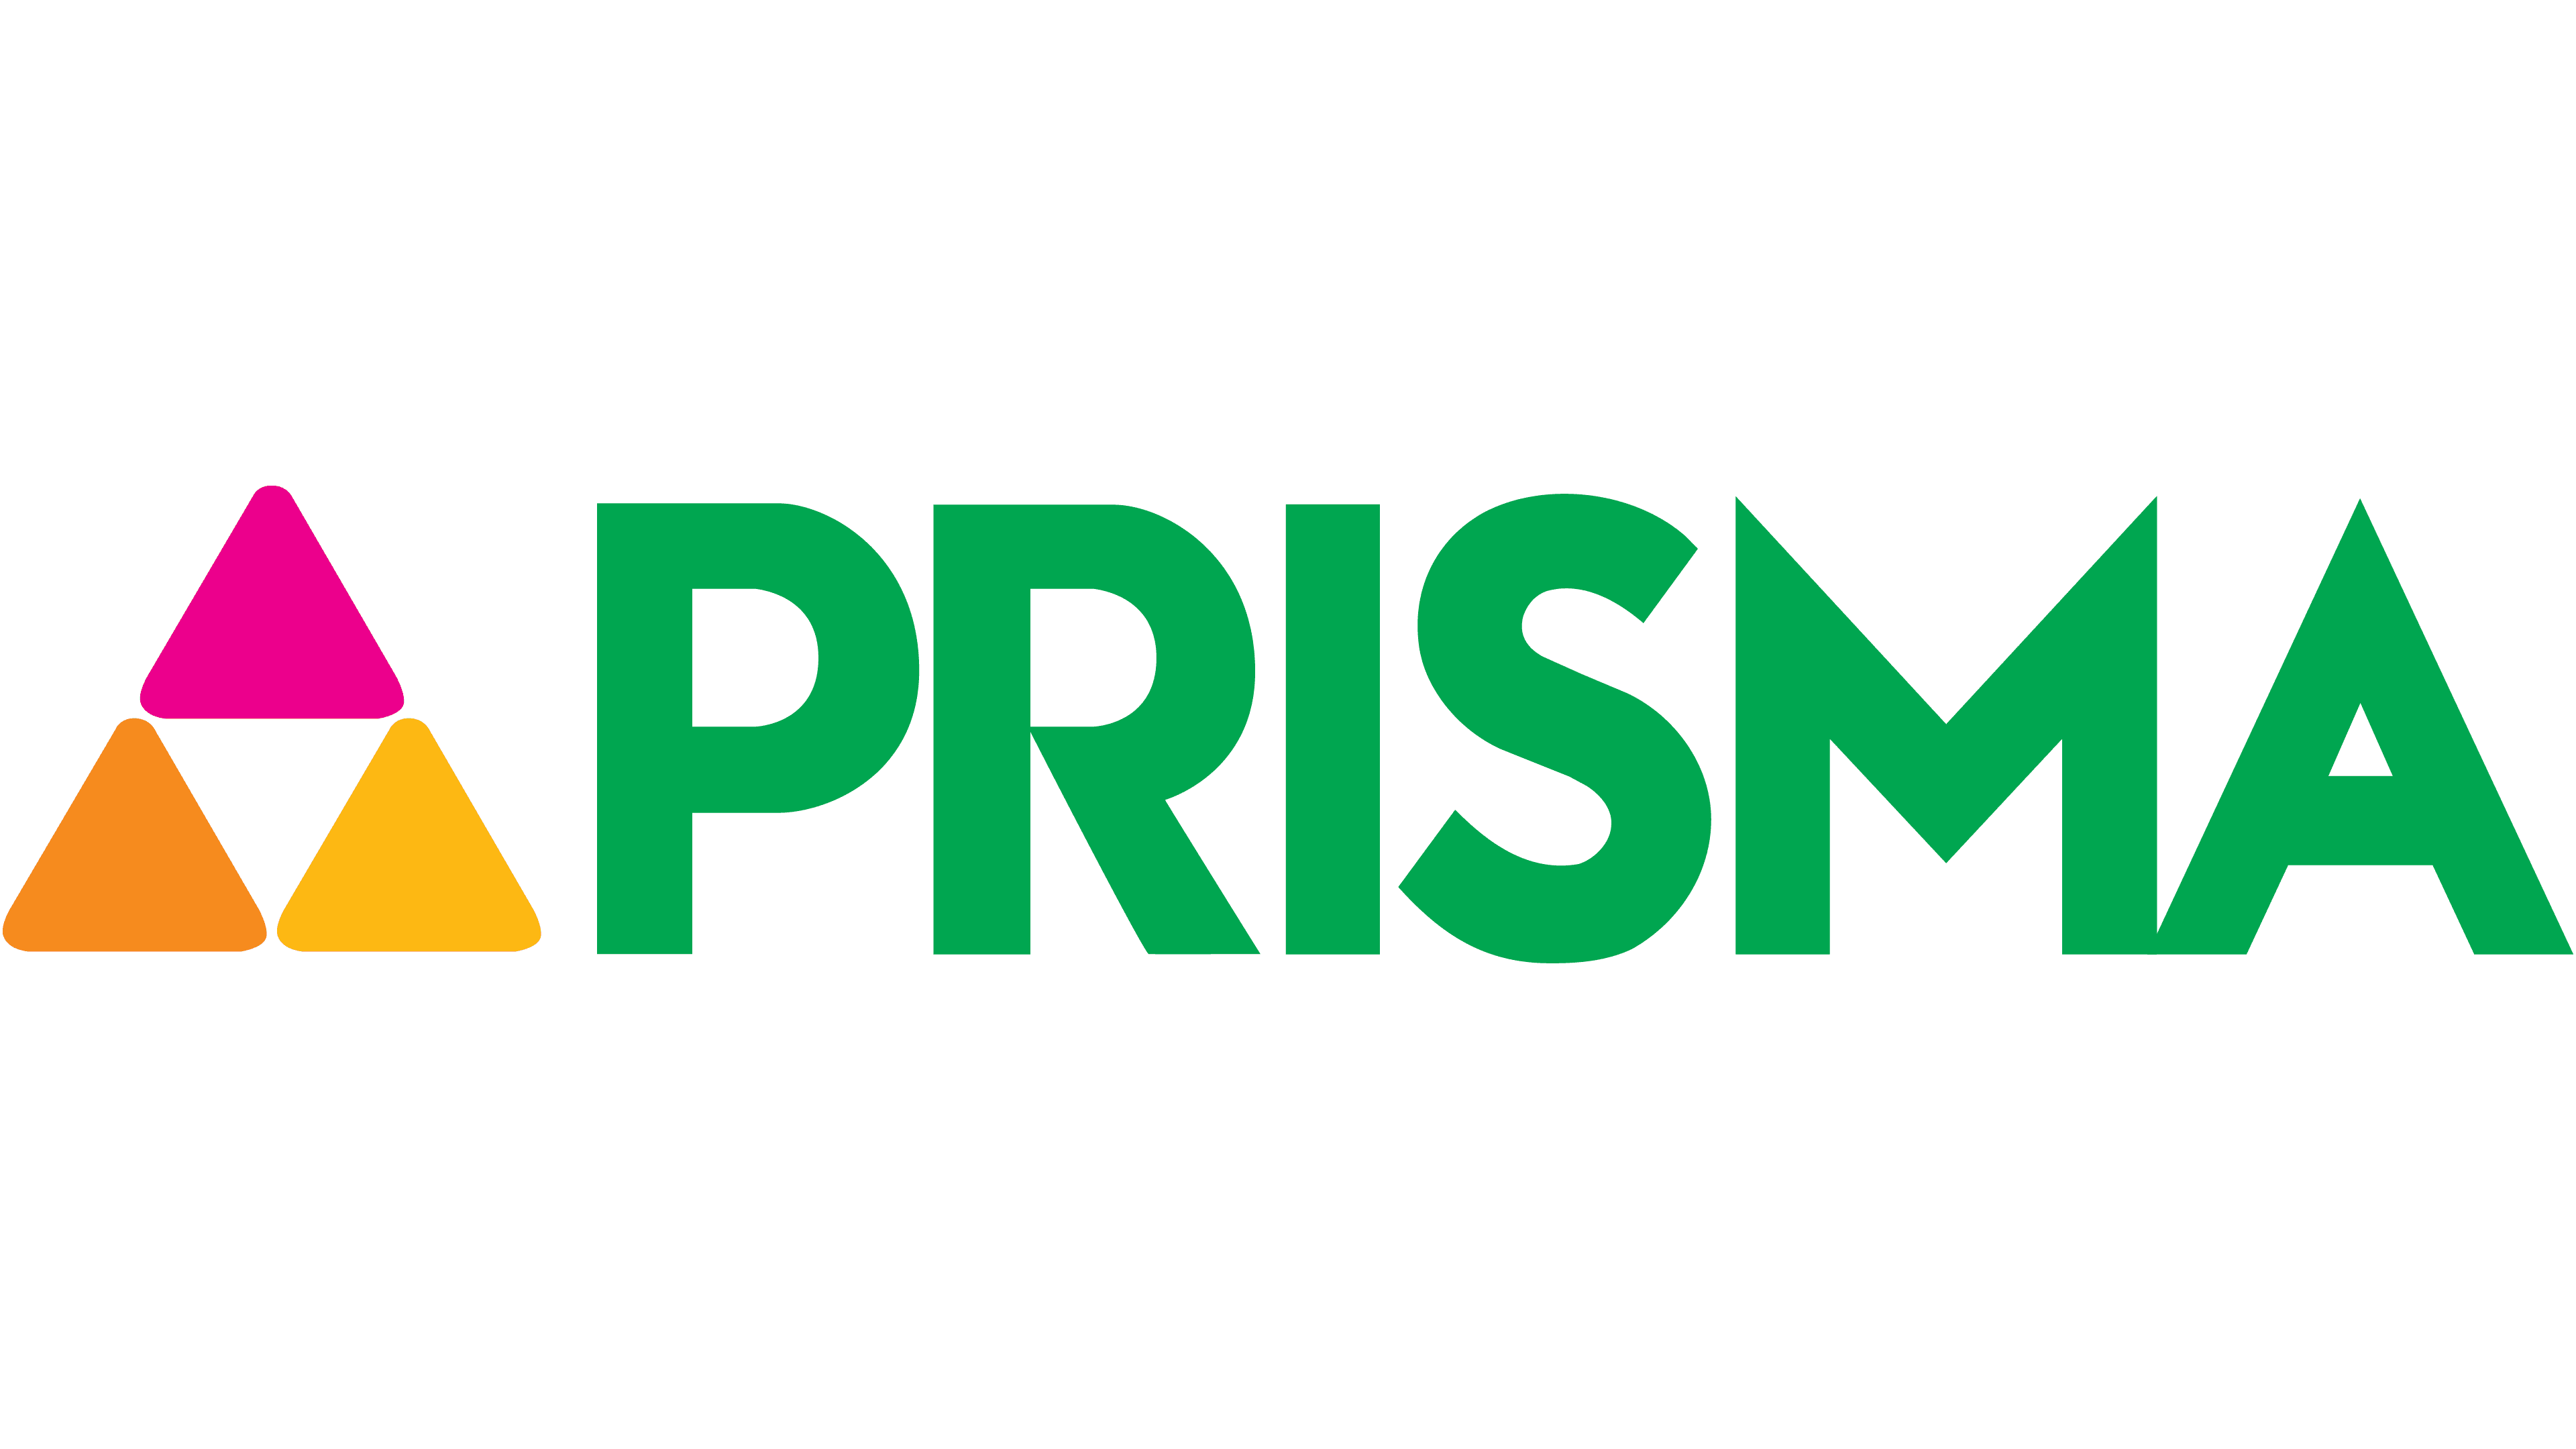 Prisma logo and symbol, meaning, history, PNG